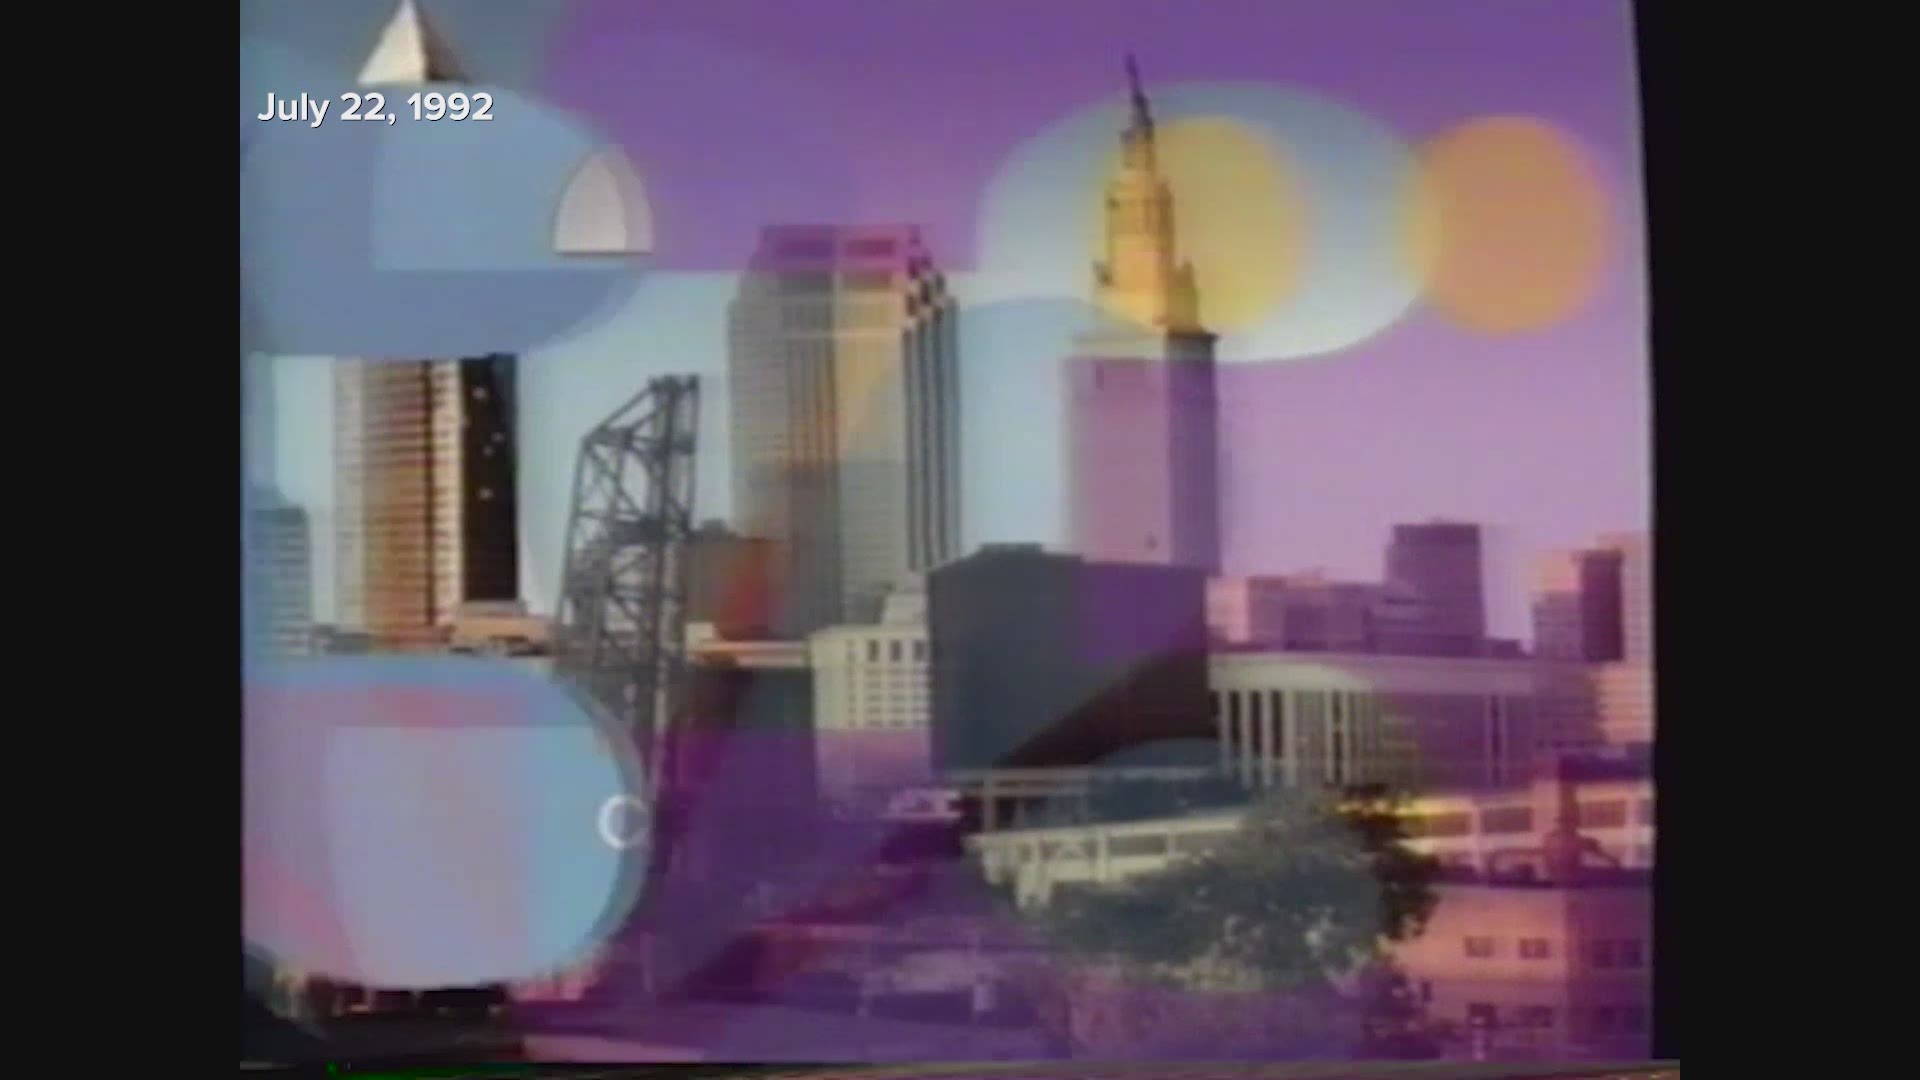 A look back at Channel 3 News in 1992